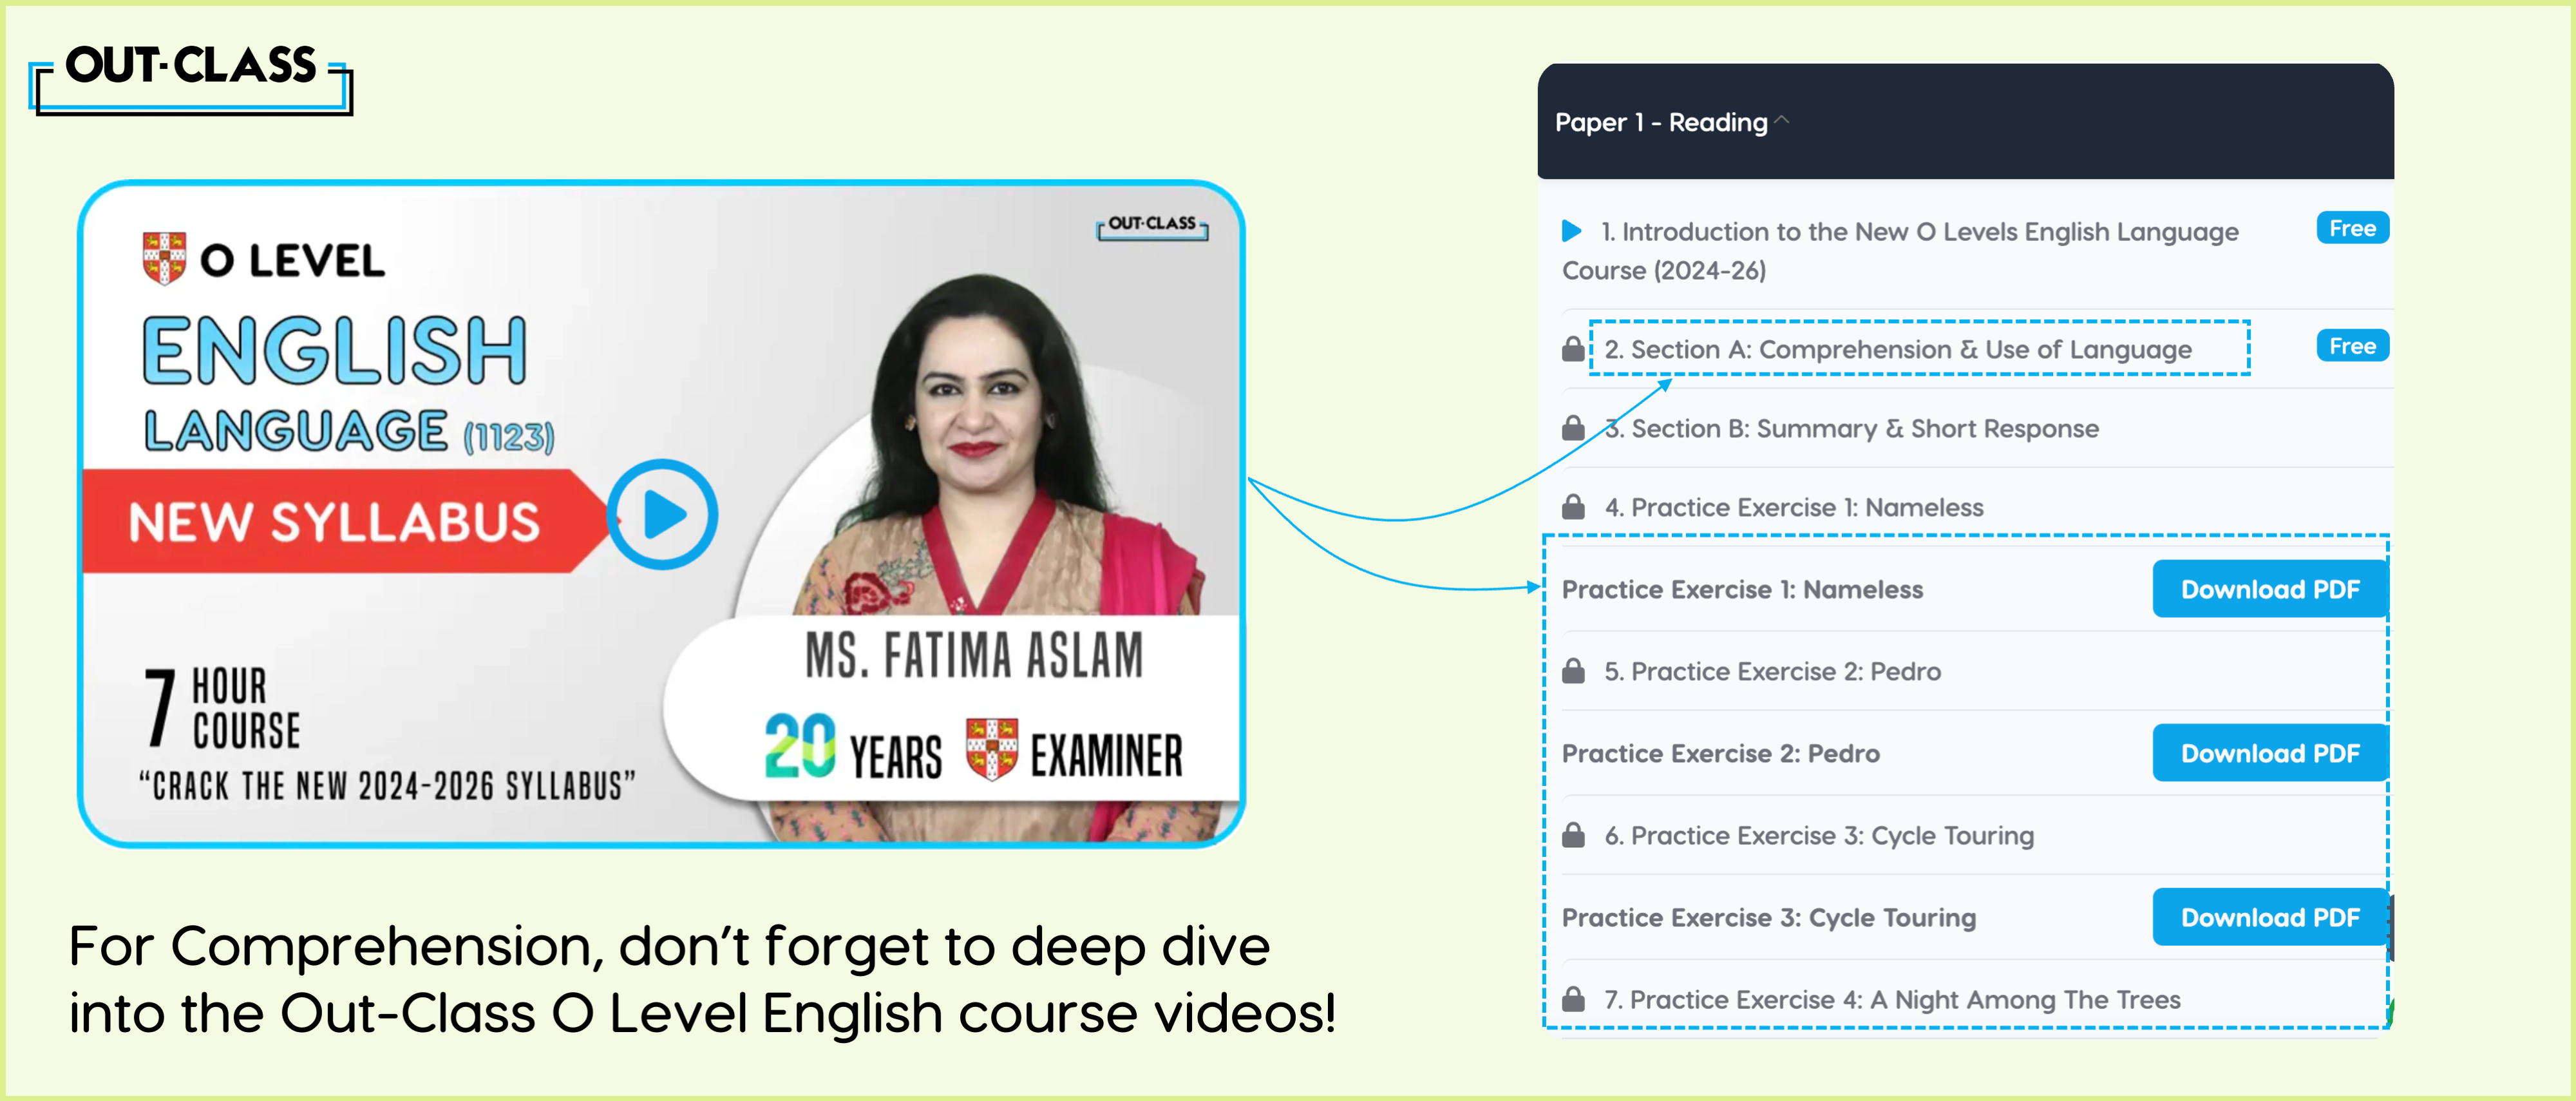 O Level English Language course that covers all the new english syllabus 1123.